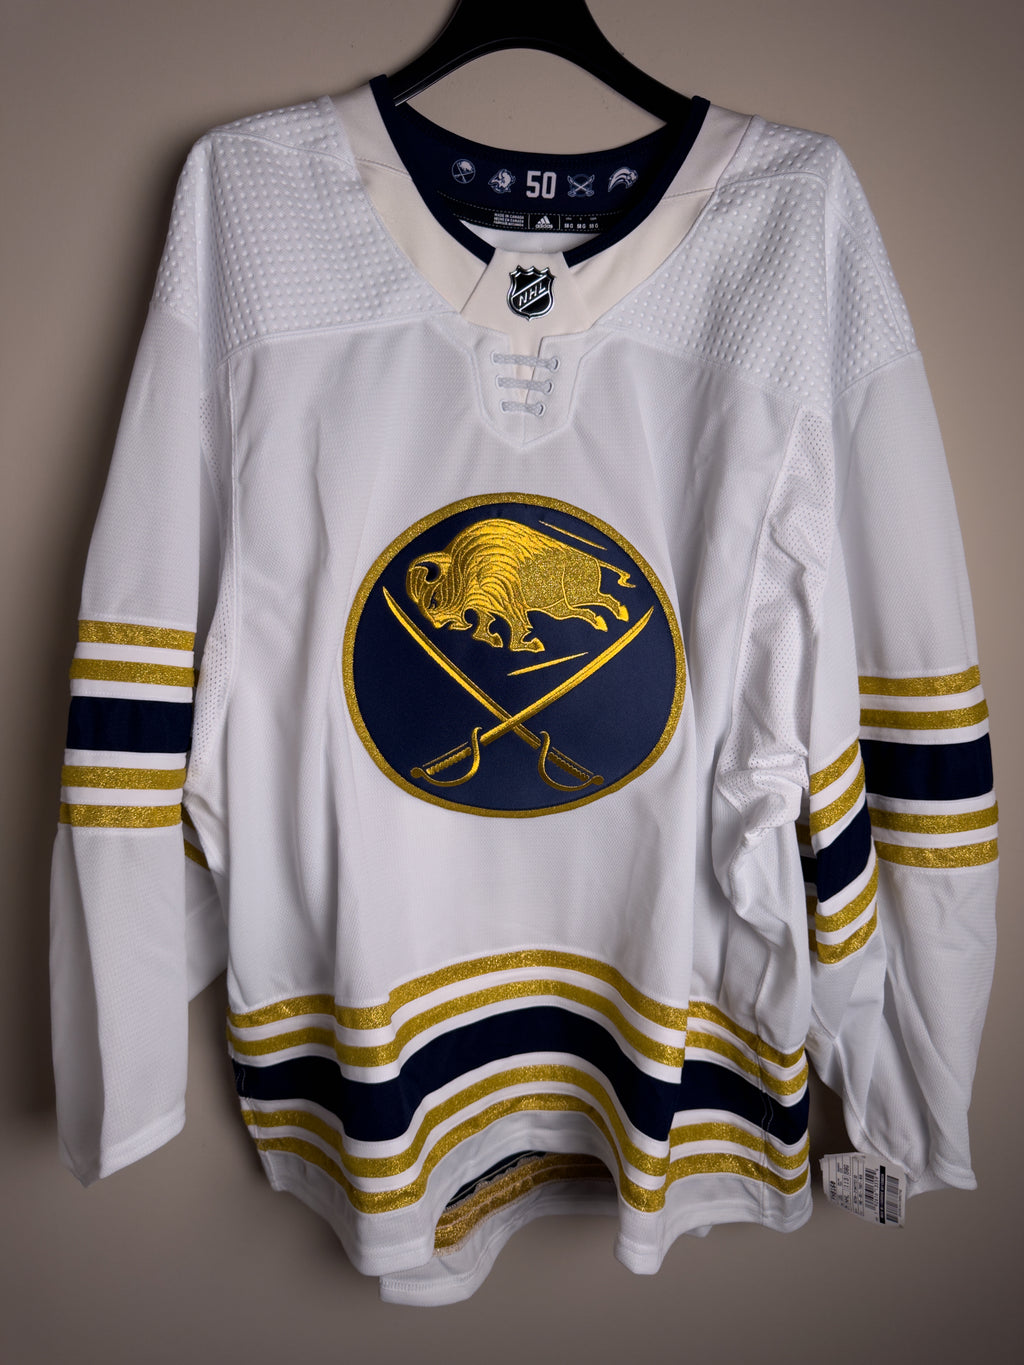 Buffalo Sabres NHL Adidas MiC Team Issued 50th Anniversary Jersey Size 58G (Goalie Cut)